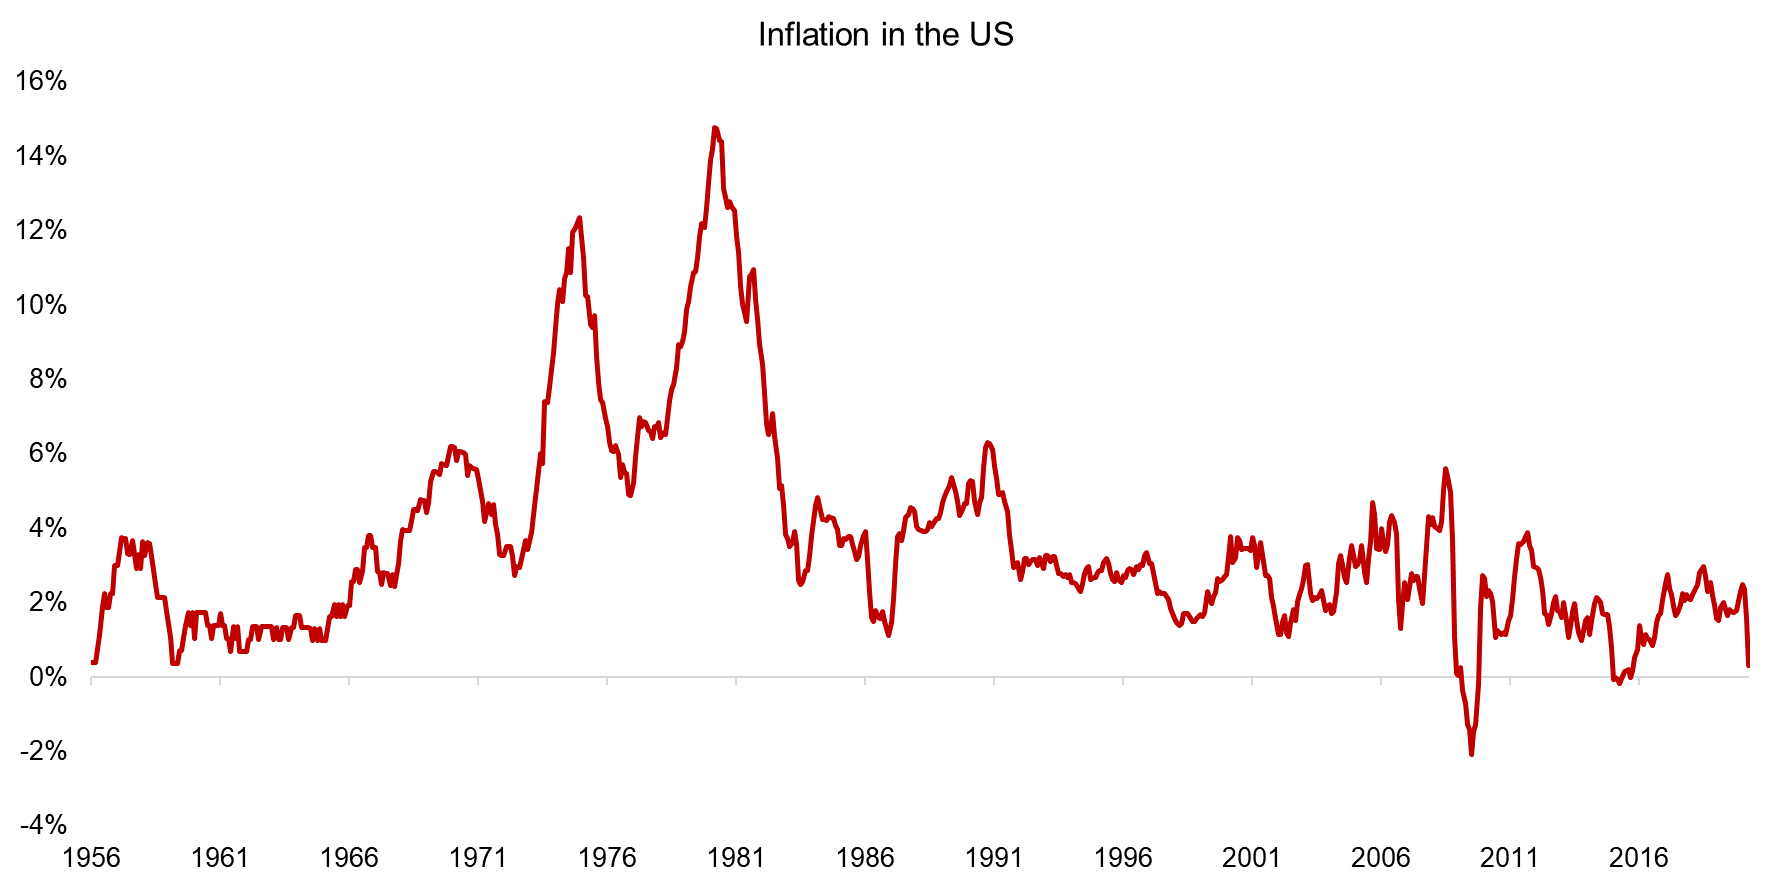 Inflation in the US